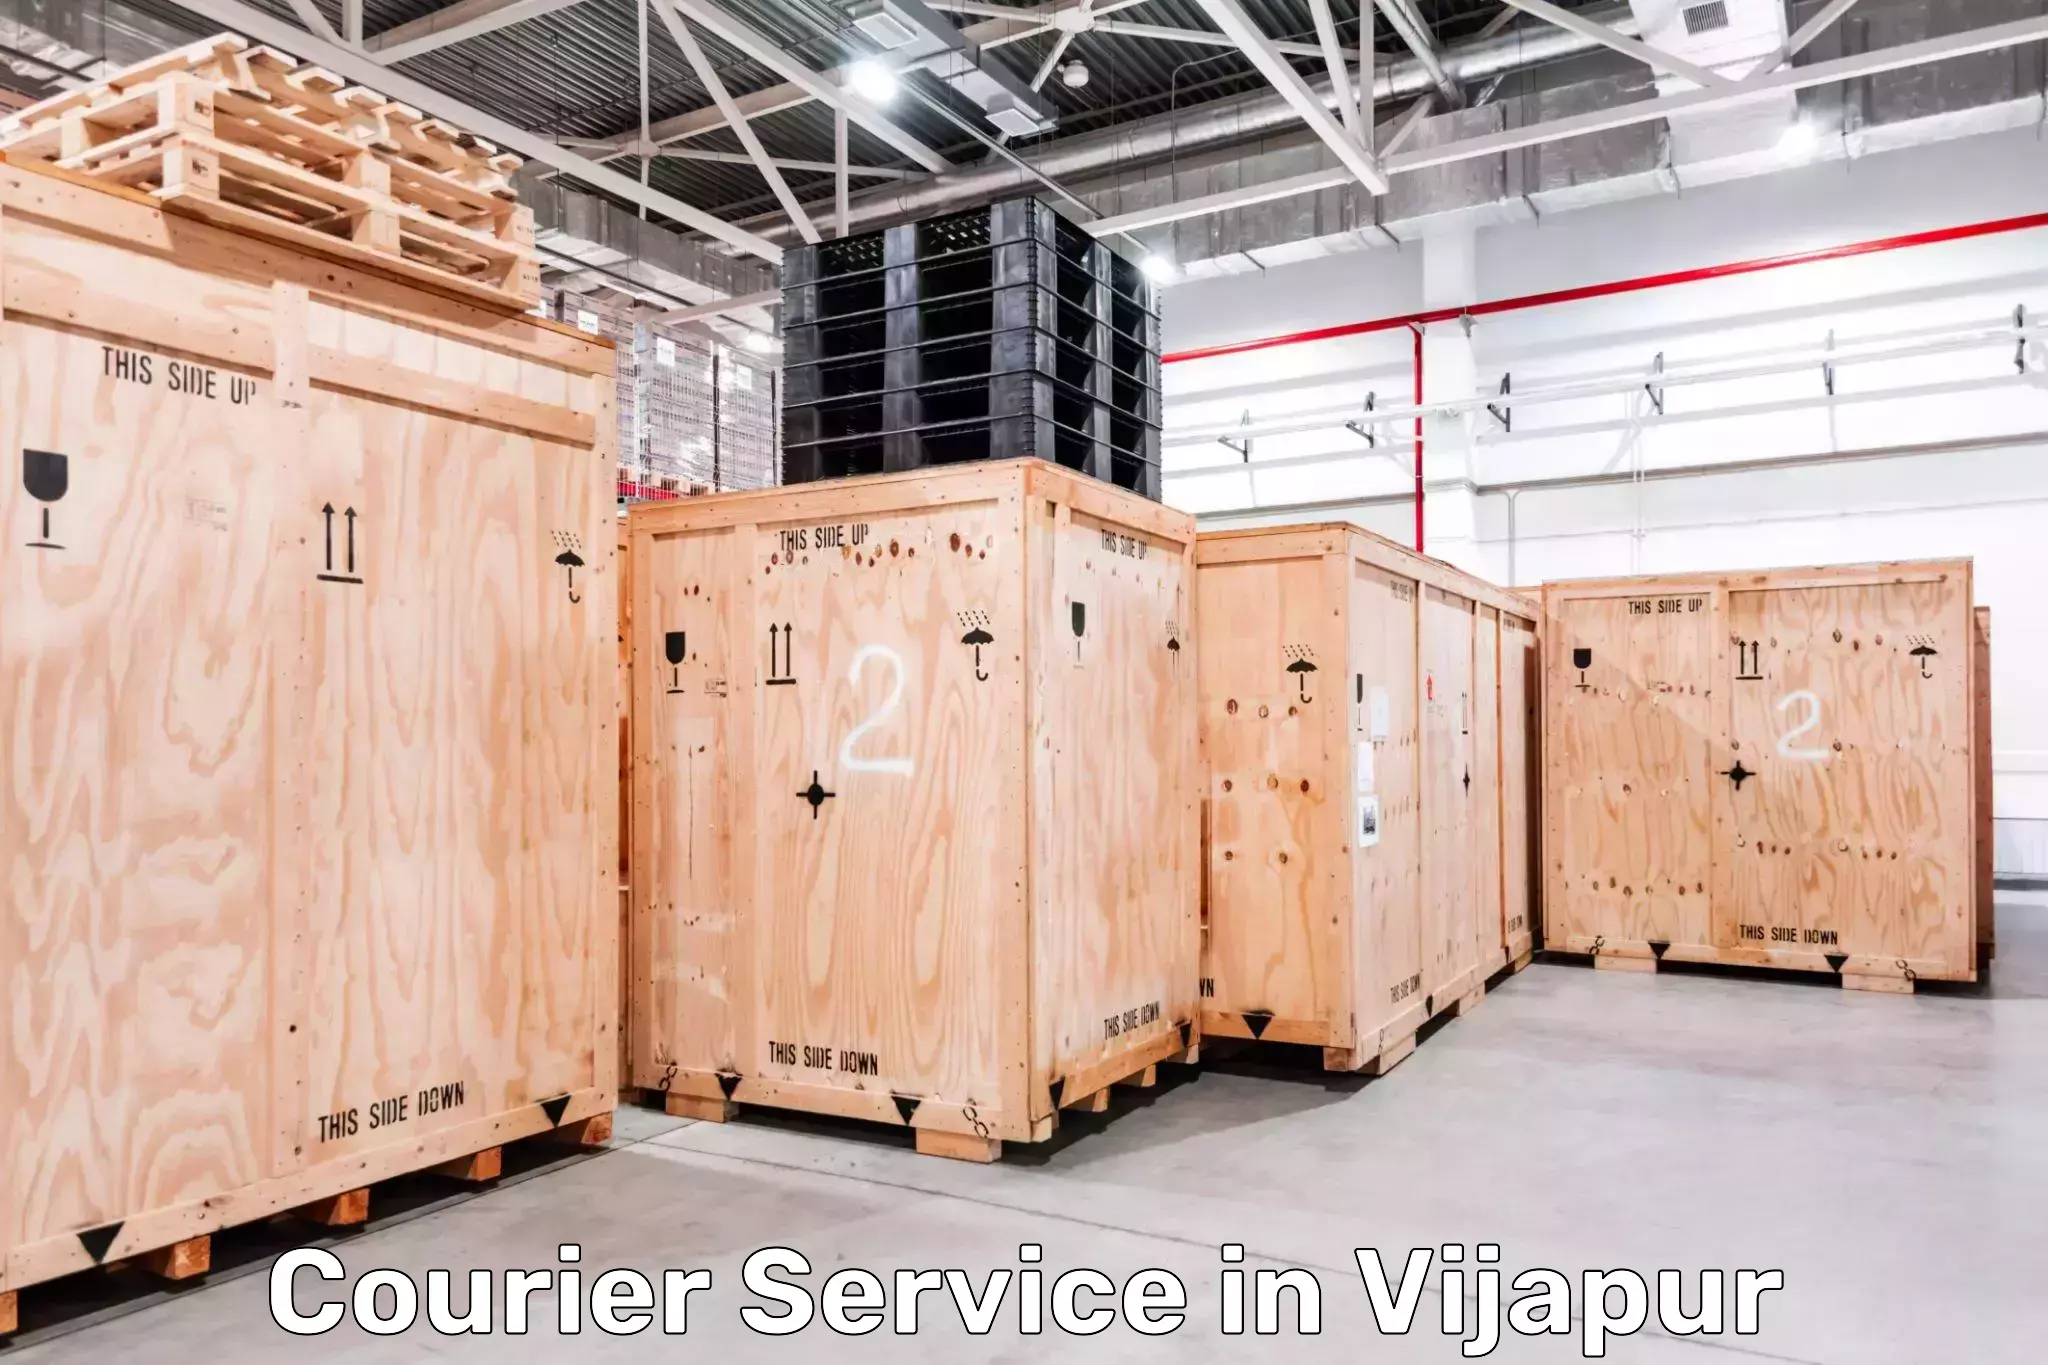 Domestic delivery options in Vijapur